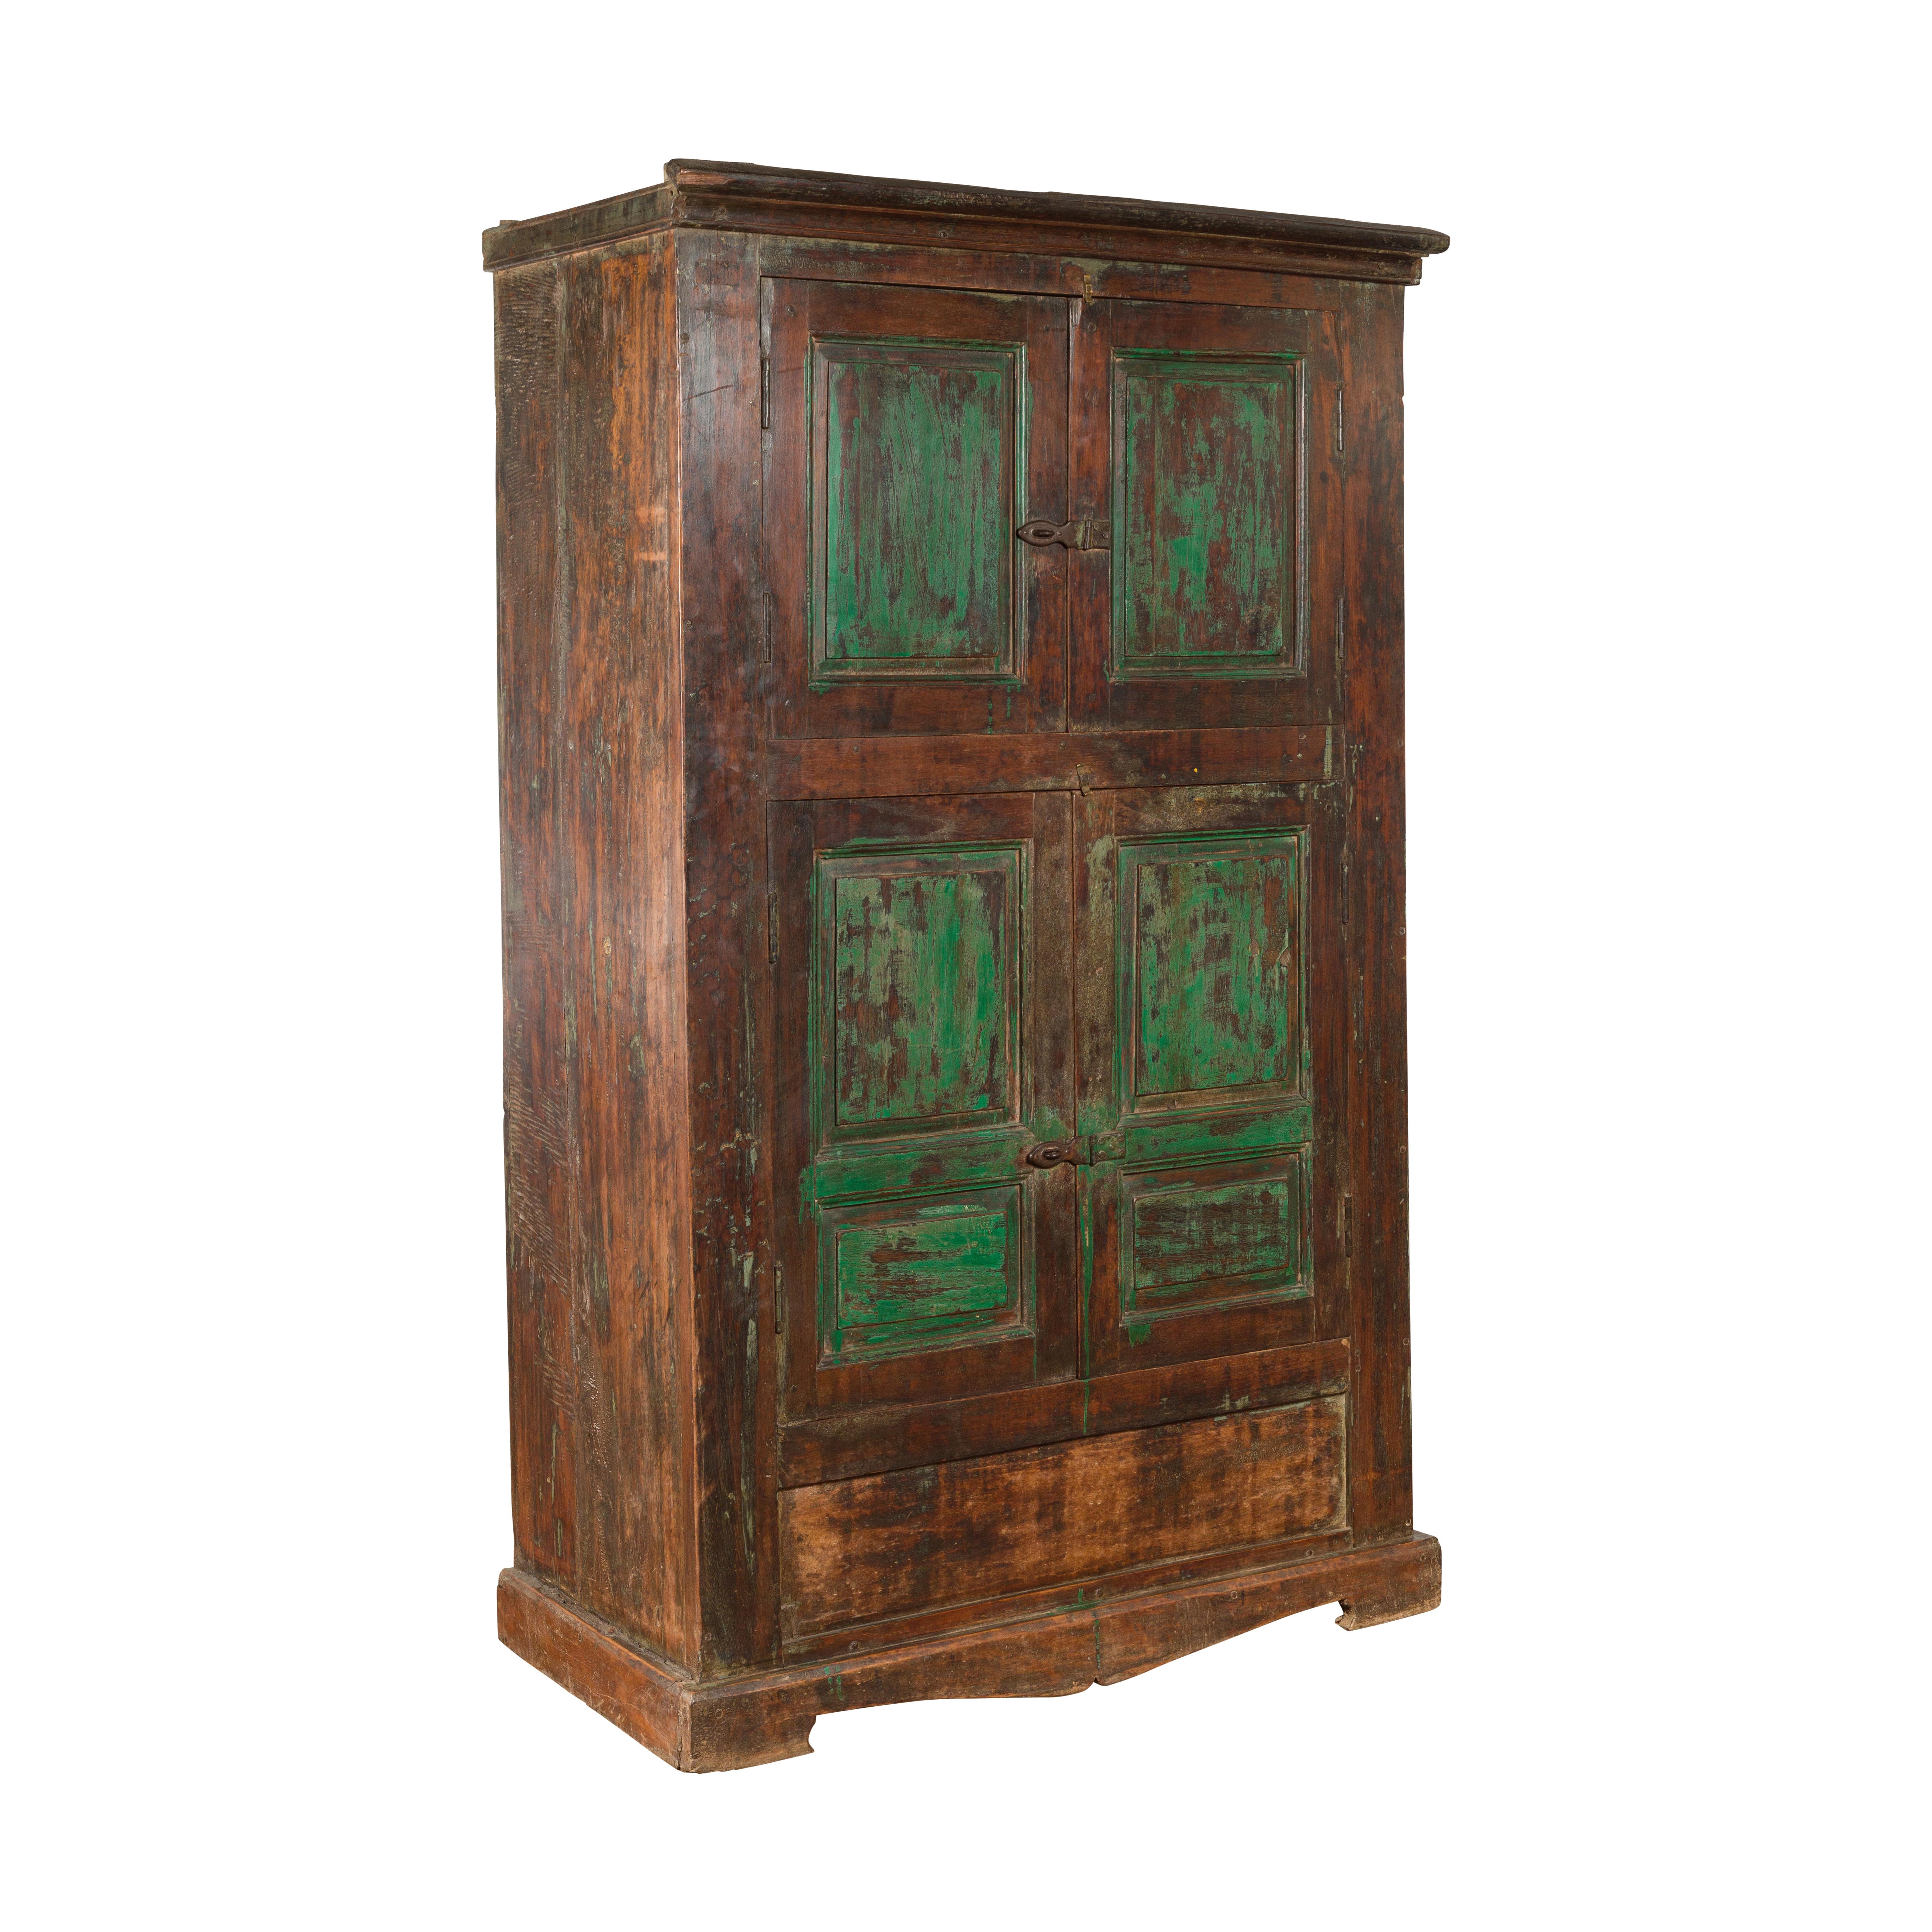 An Indian hand-carved painted wood cabinet from Goa, with green accents and distressed patina. Created in Goa, a Portuguese colony for 450 years until it was annexed by India in 1961, this 19th century cabinet features a simple cornice sitting above